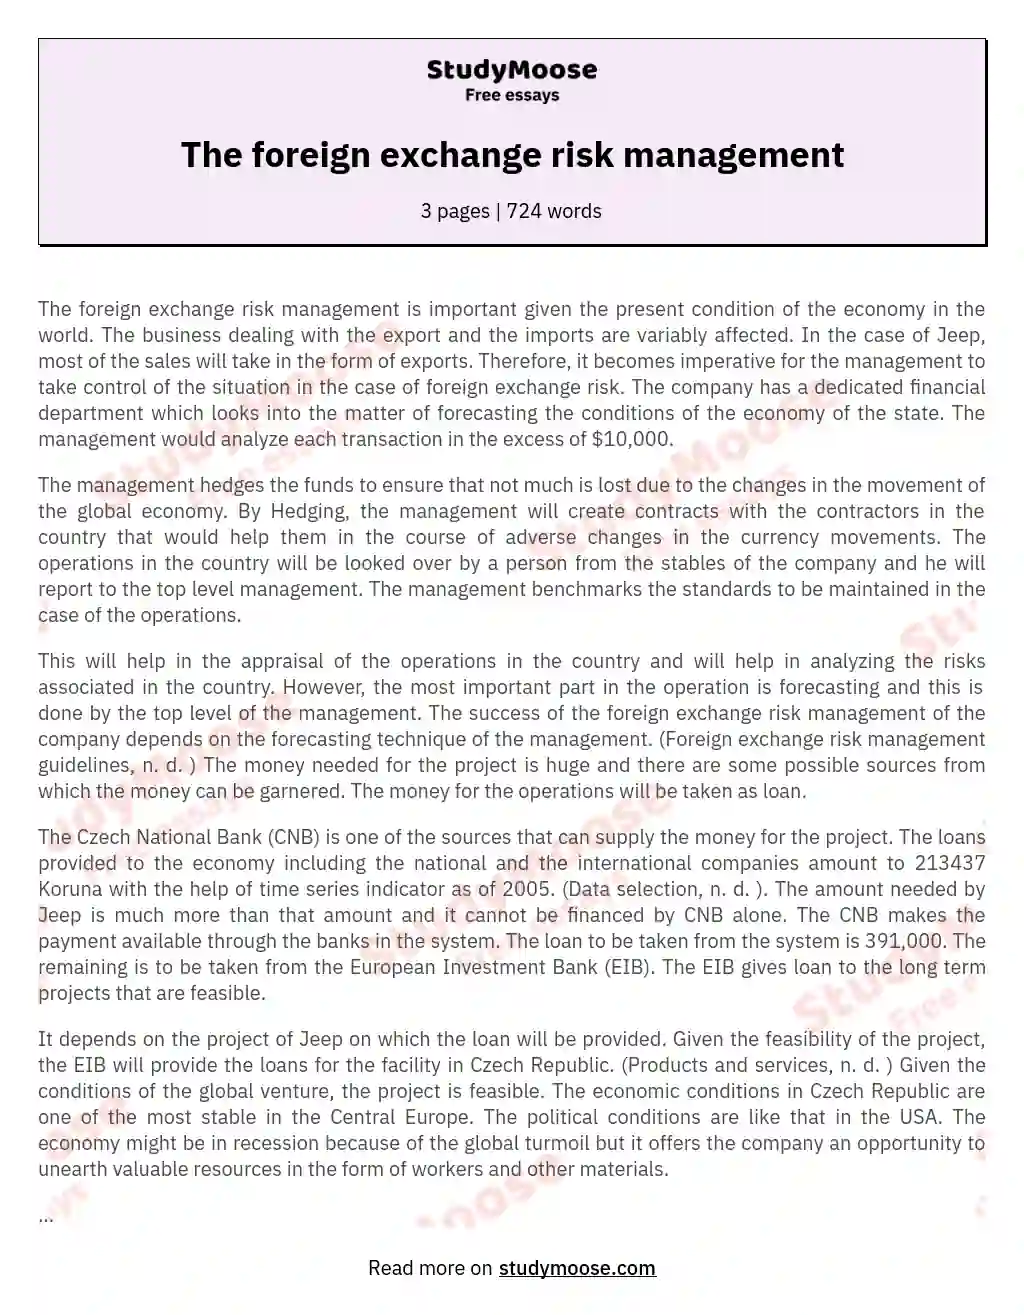 The foreign exchange risk management essay